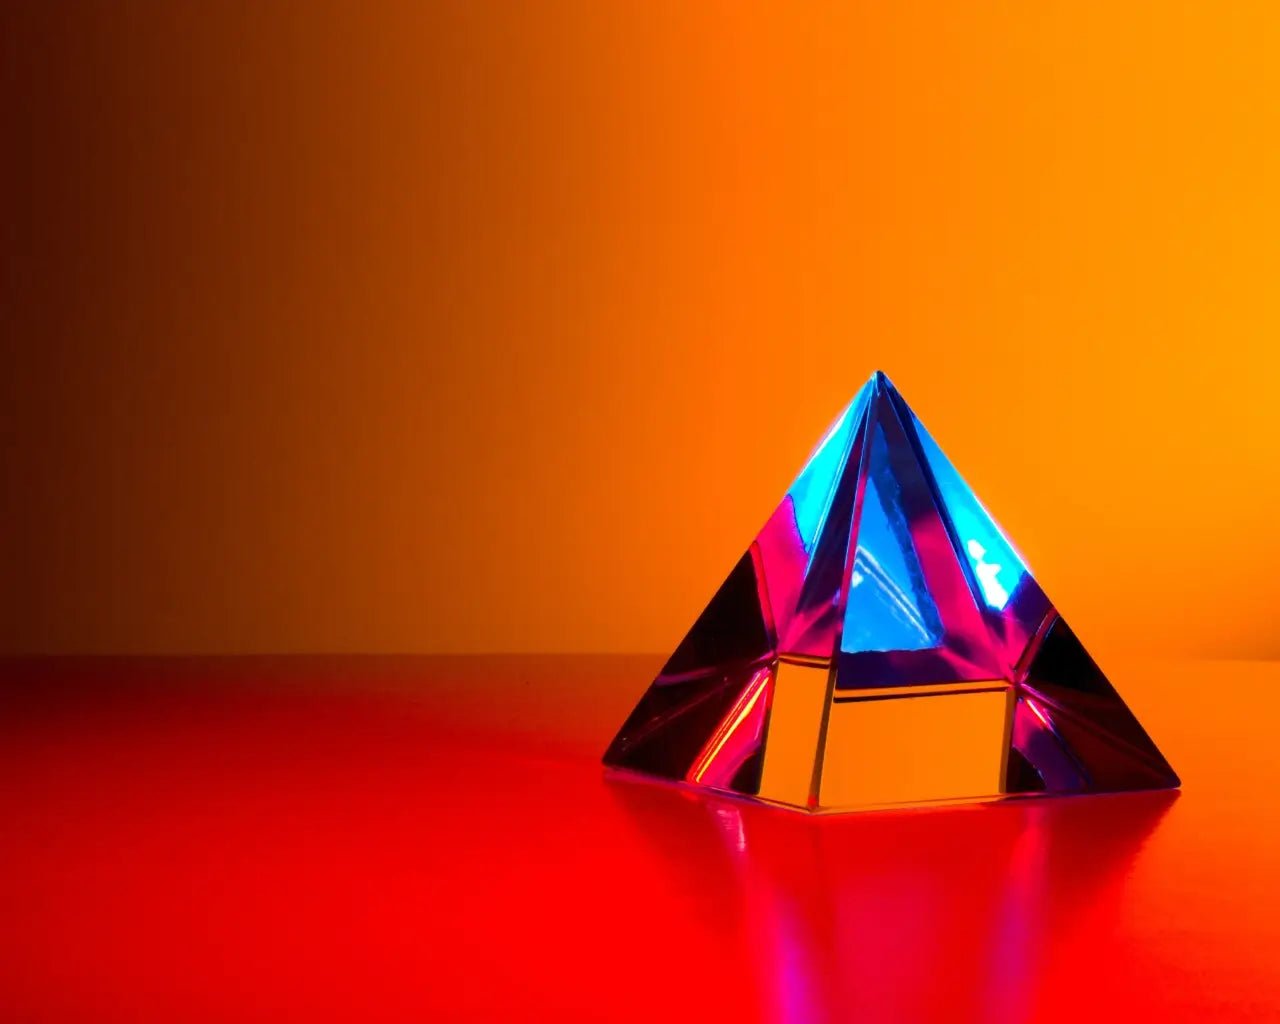 Image of a prism